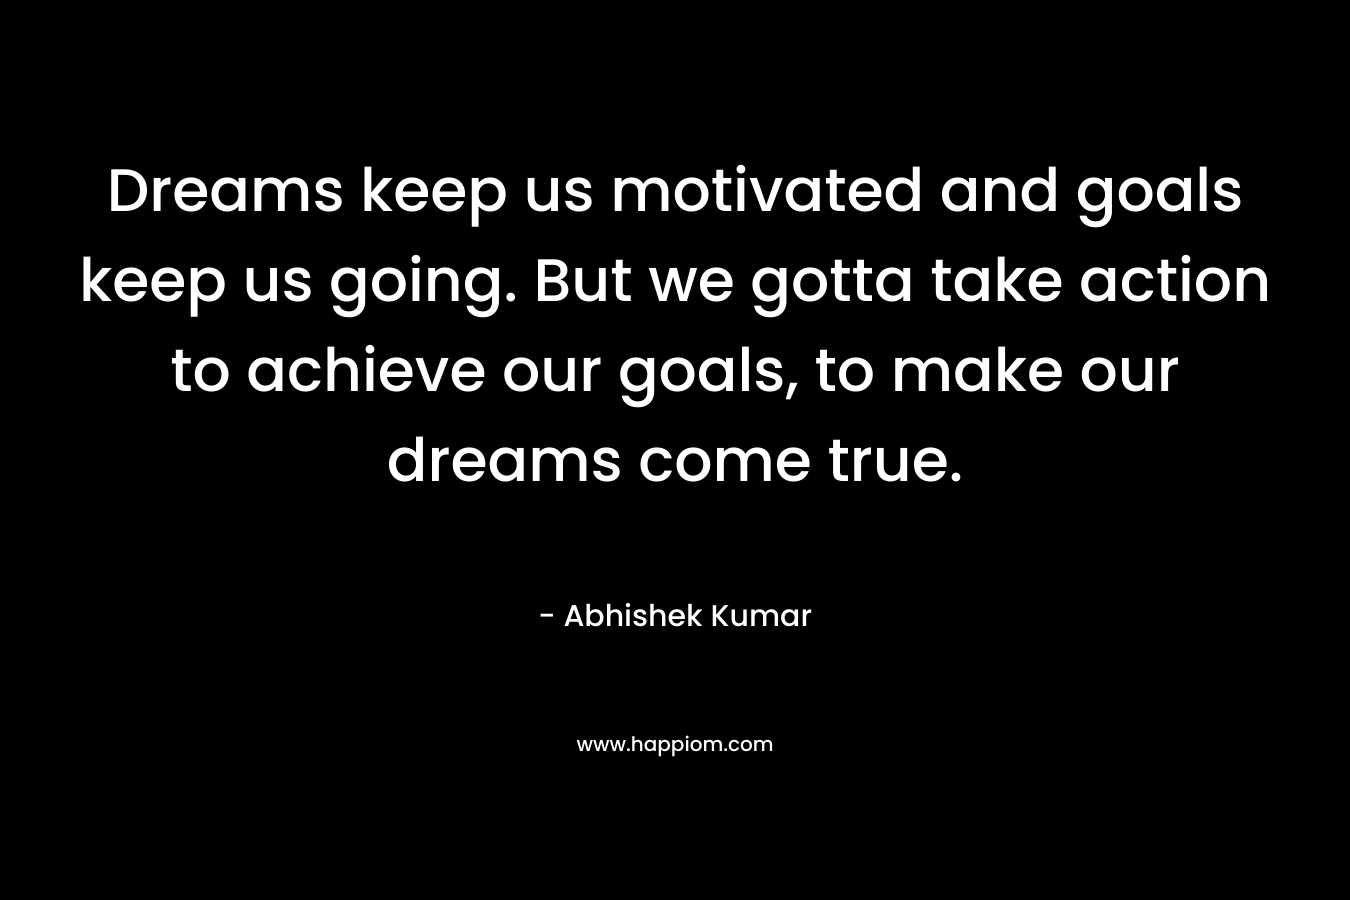 Dreams keep us motivated and goals keep us going. But we gotta take action to achieve our goals, to make our dreams come true.